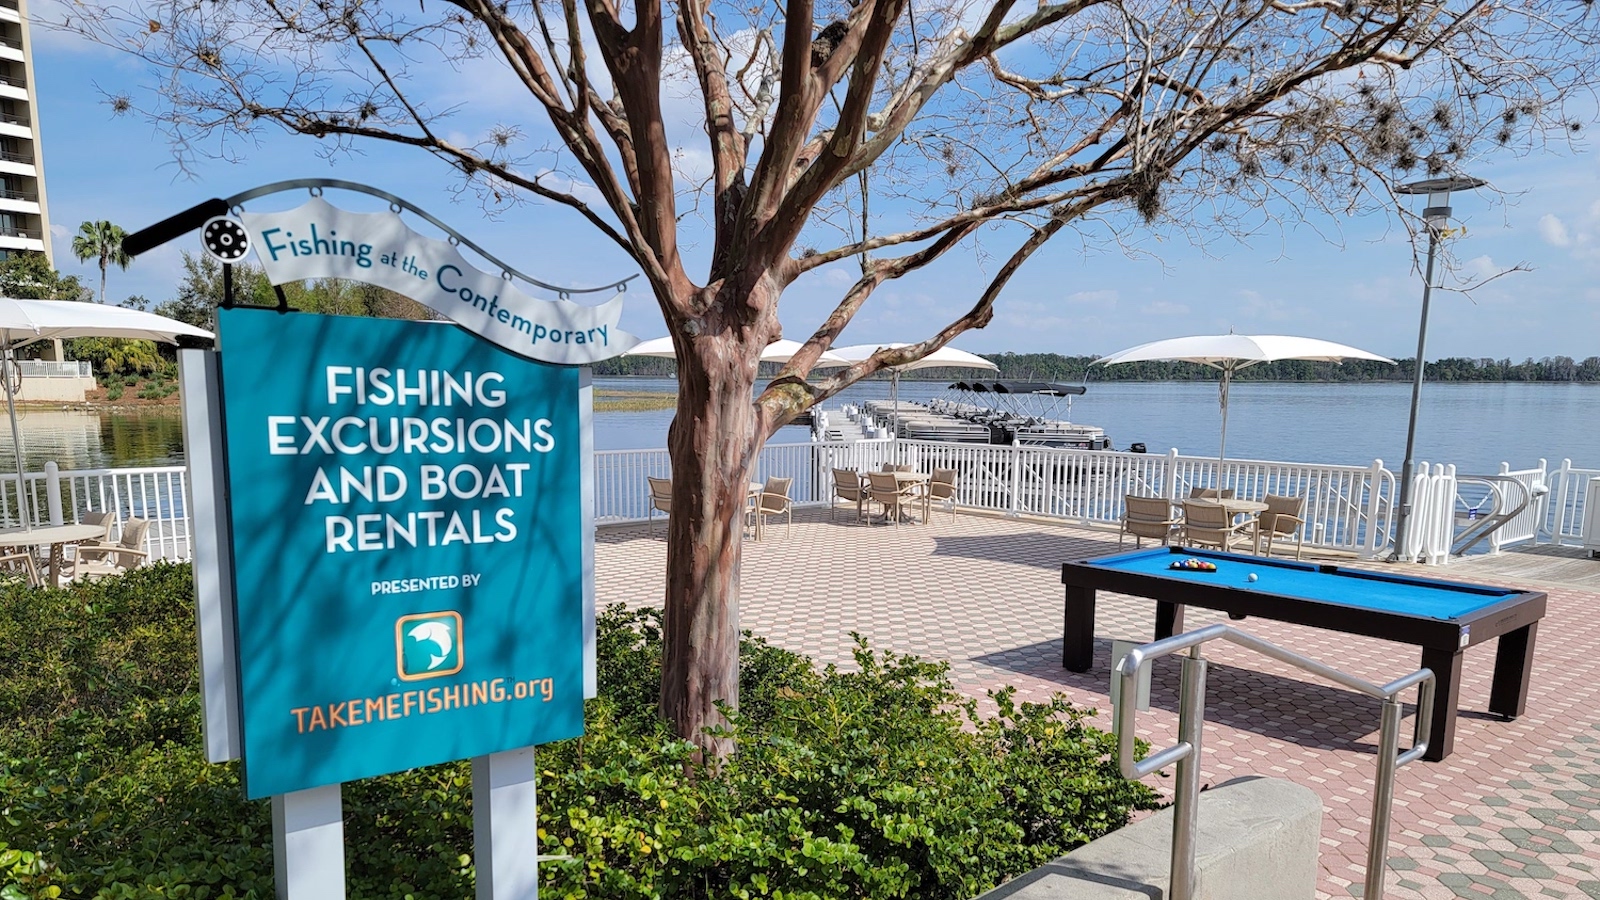 Fishing excursion sign at Disney's Contemporary Resort